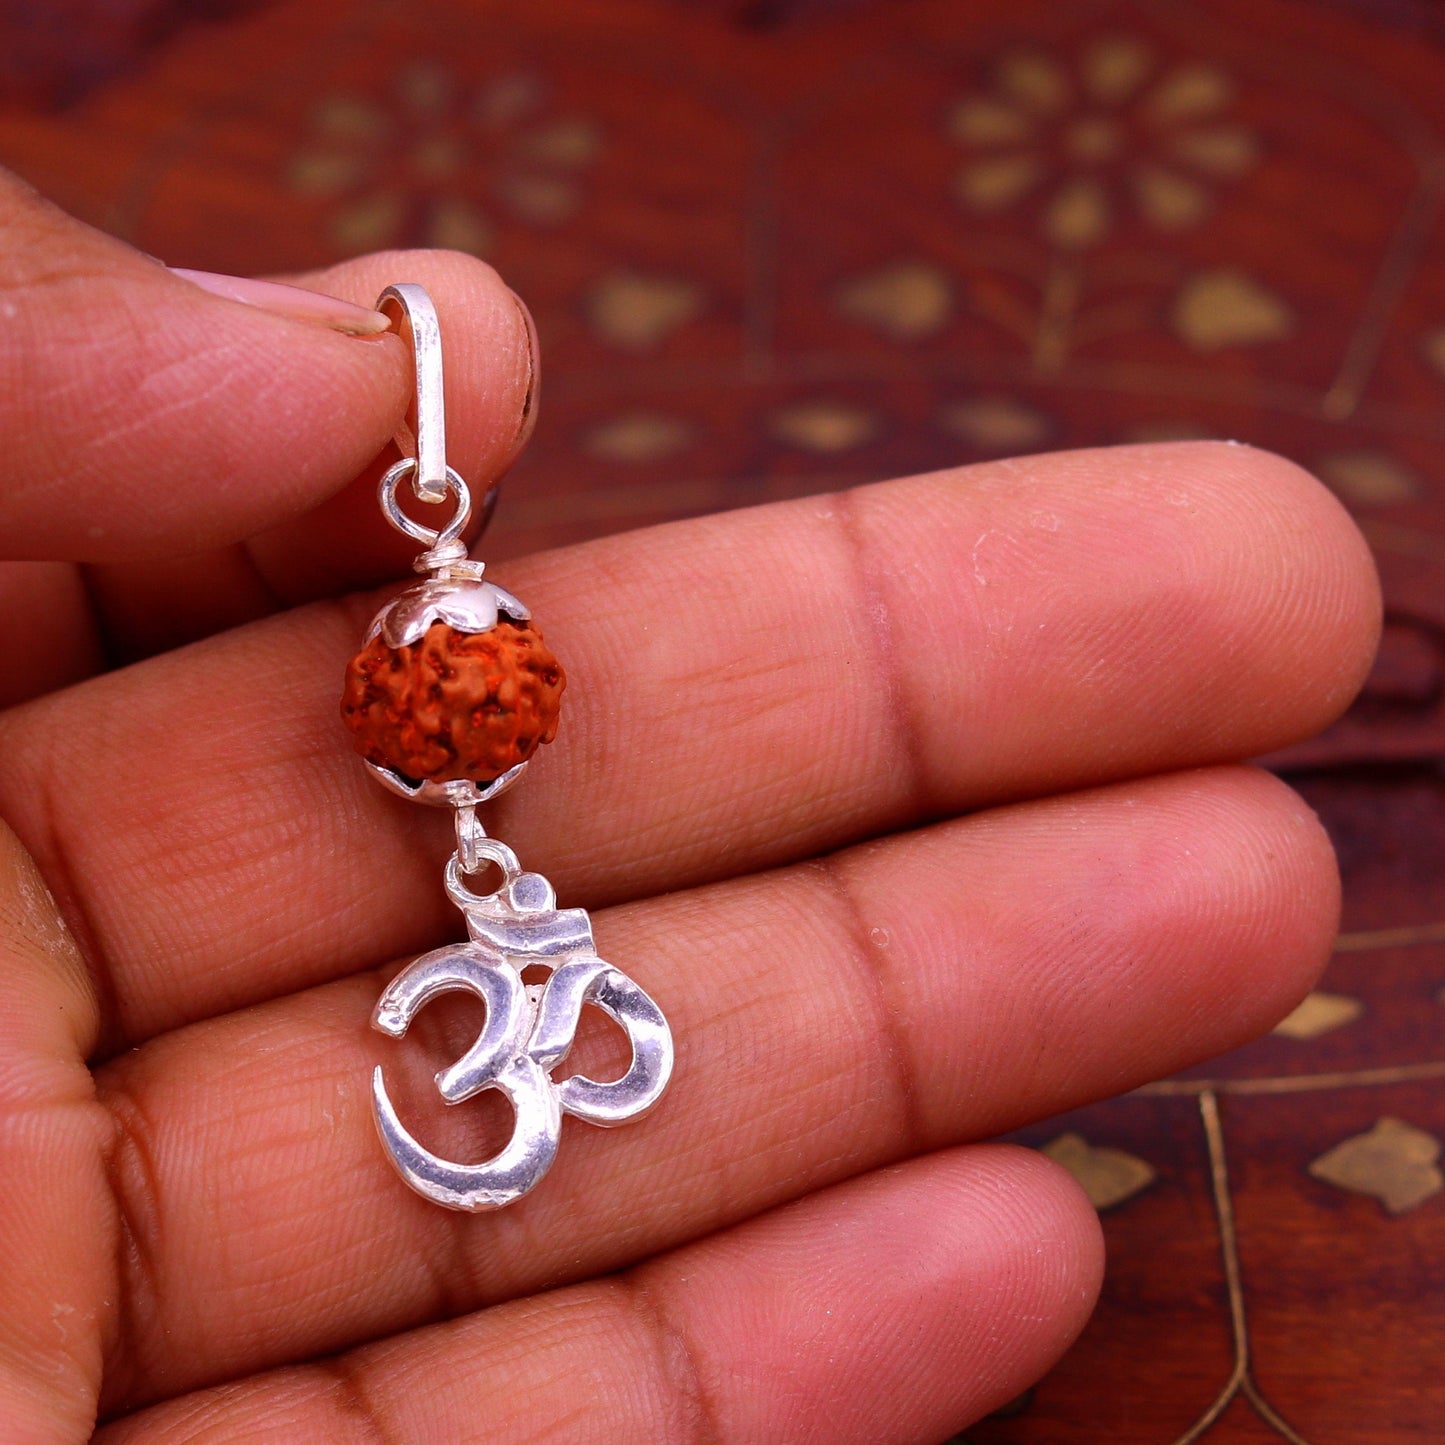 Sterling silver Handmade Aum mantra pendant with fabulous natural rudraksha beads excellent unisex gifting light weight jewelry nsp279 - TRIBAL ORNAMENTS